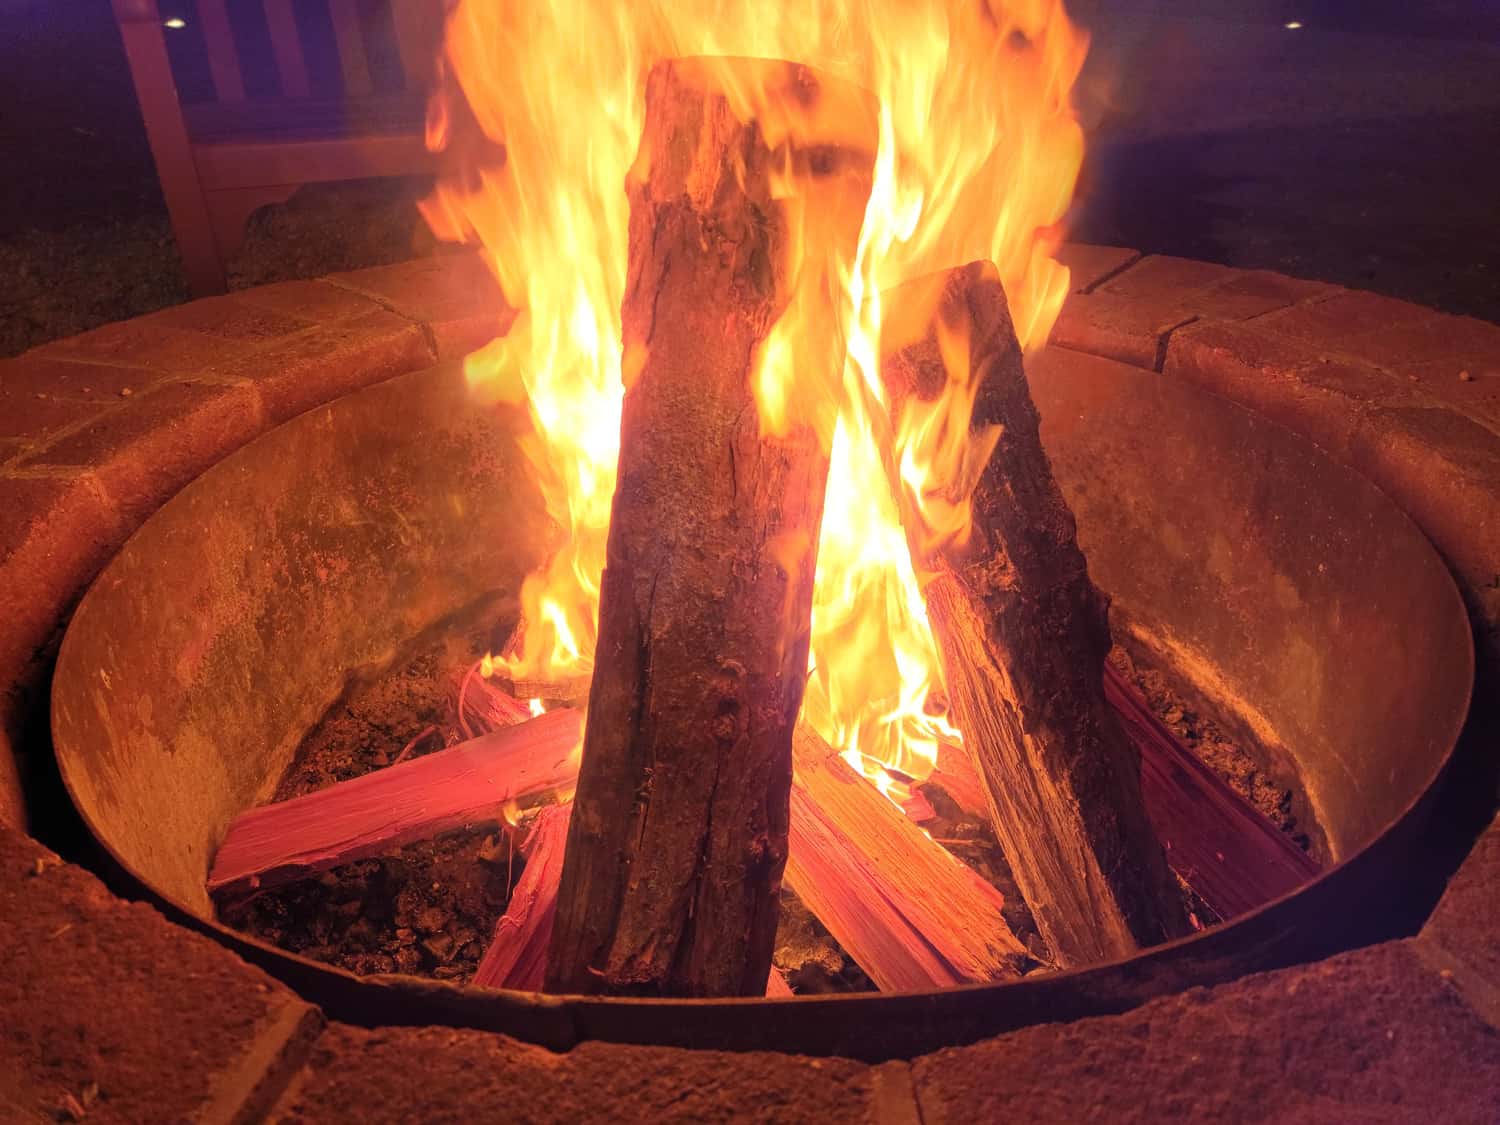 logs or wood on fire in fire pit with flames and smoke